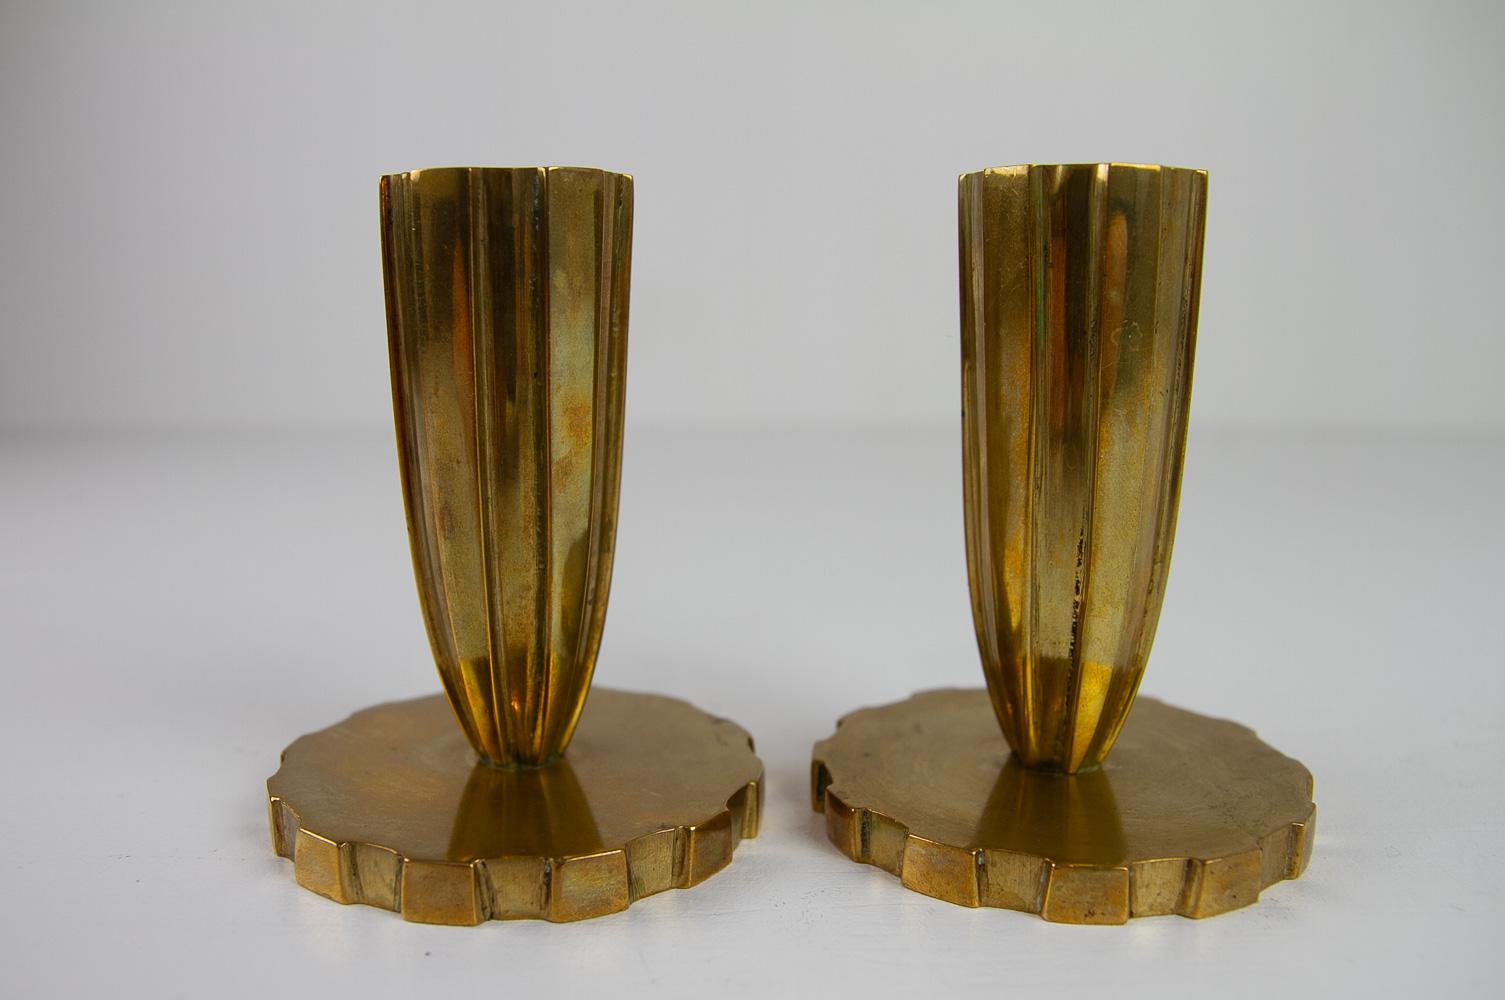 Danish Art Deco Brass Candleholders by Vendor Copenhagen, 1930s. Set of 2.
Lovely pair of heavy solid brass candlesticks by Danish manufacturer Vendor Copenhagen, Denmark. 
Tapered fluted body on wide round base, in the style of Tinos.

Marked